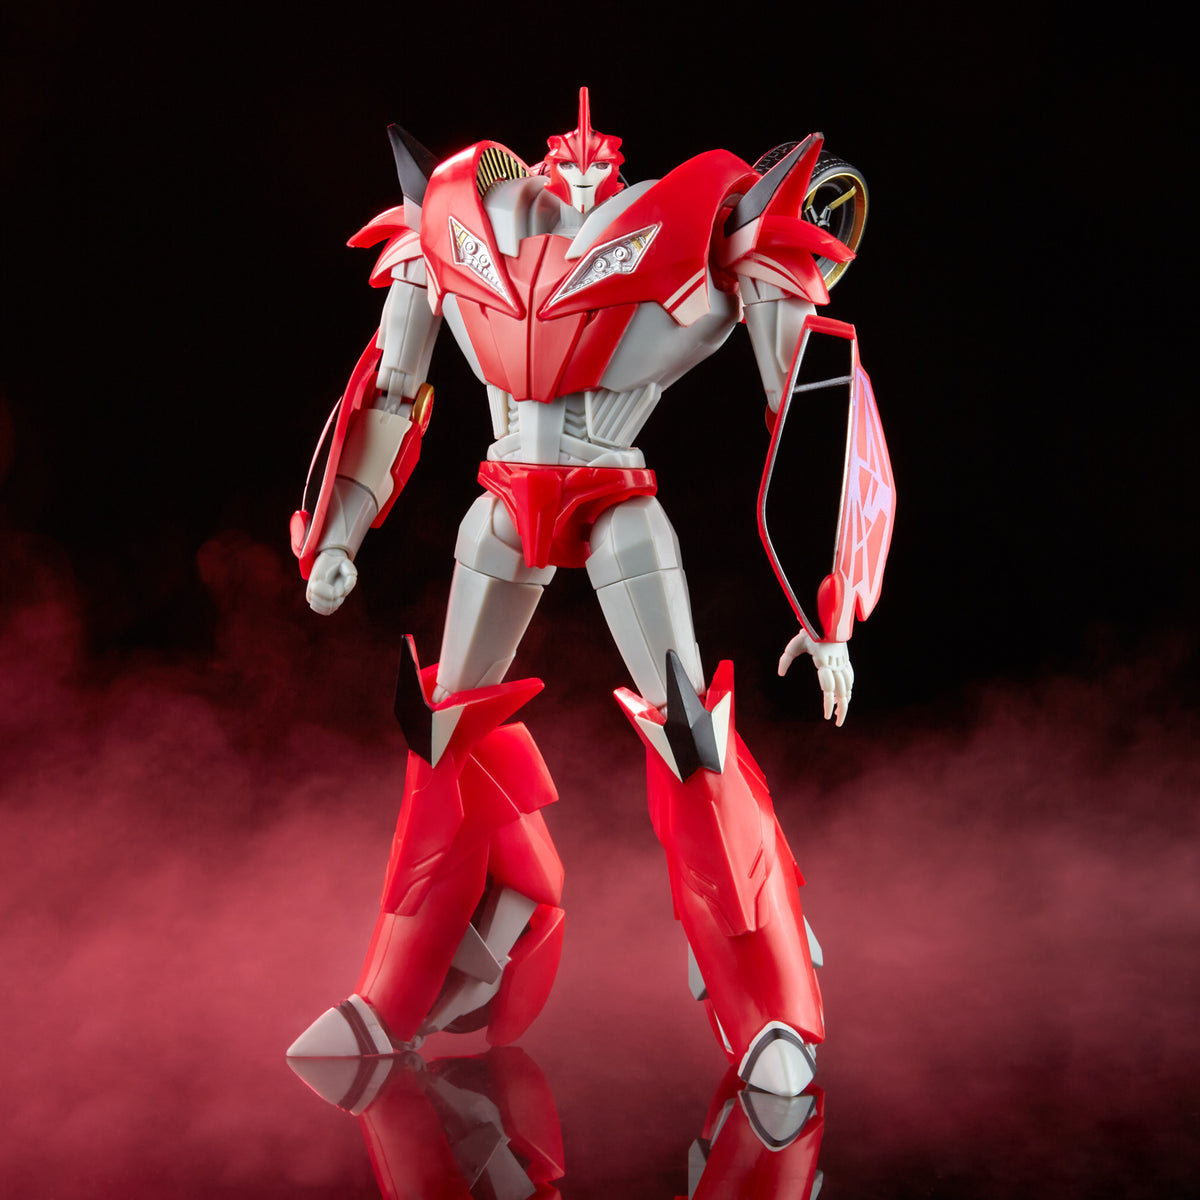 Transformers Prime Knock Out Review and Gallery - Transformers